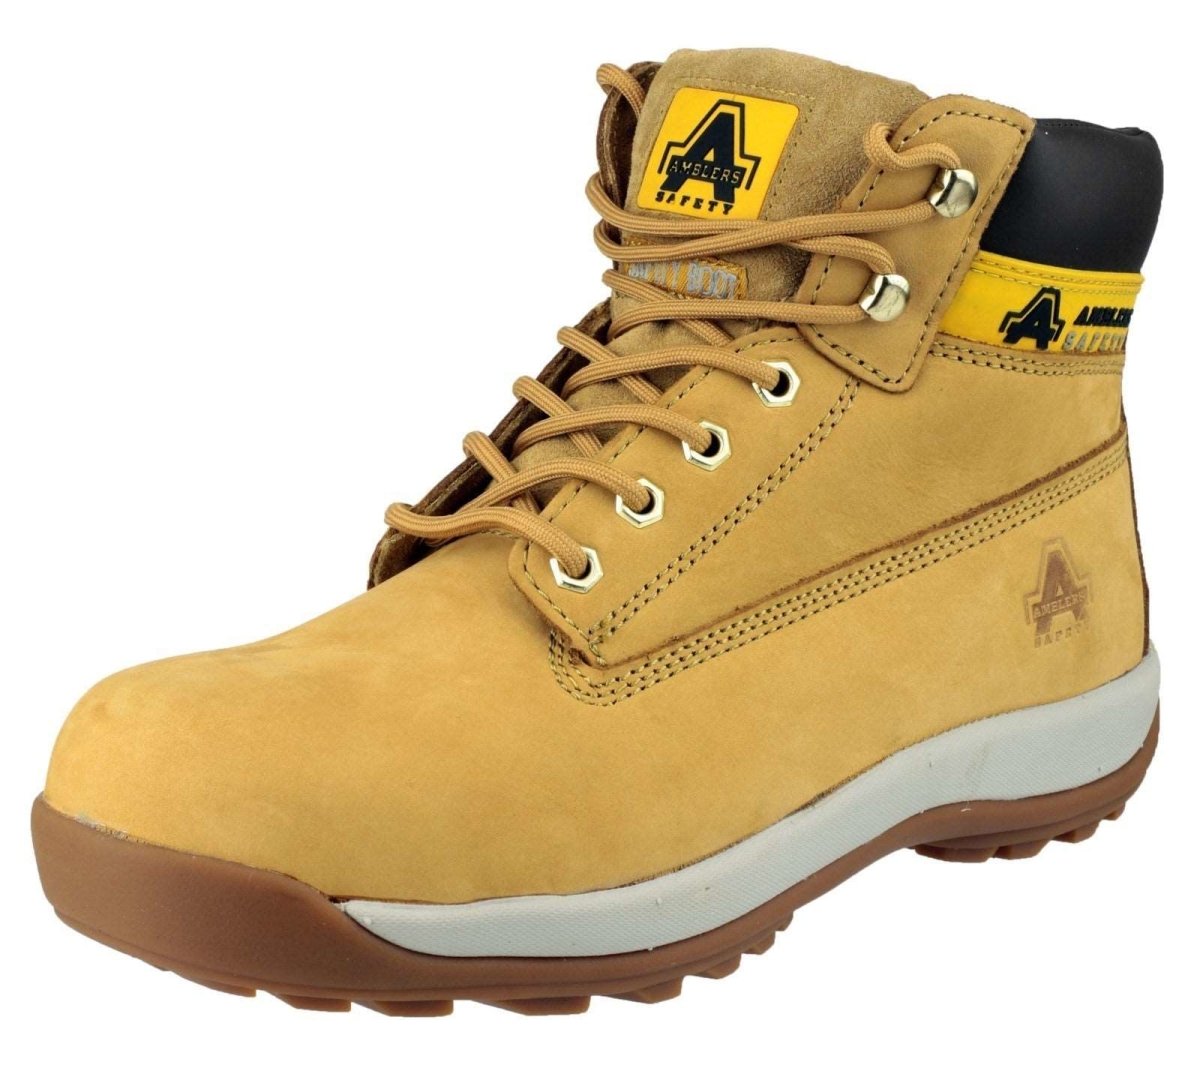 Amblers FS102 Lace Up Safety Boots - Shoe Store Direct